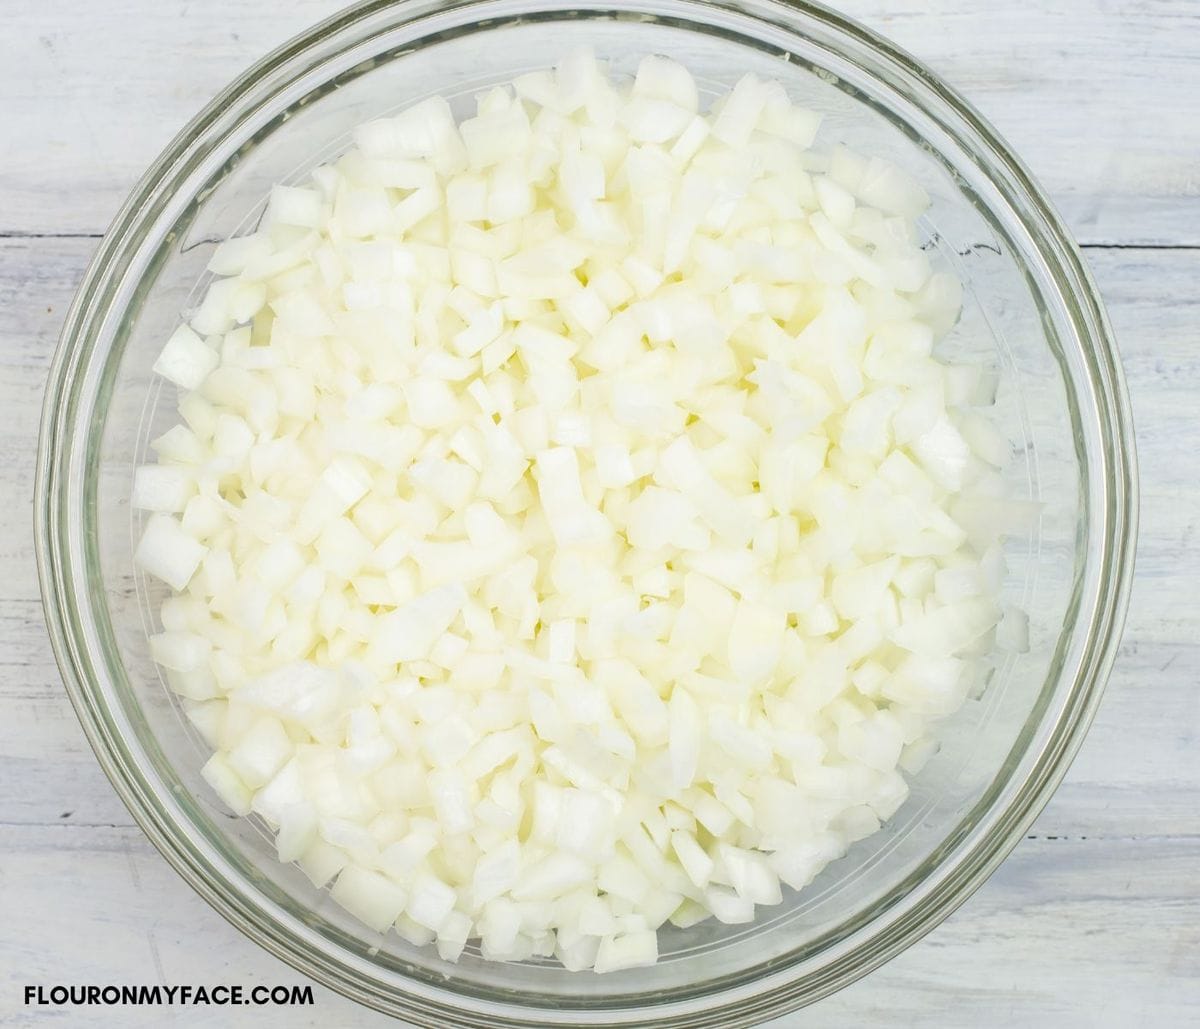 A large glass bowl filled with diced onions.